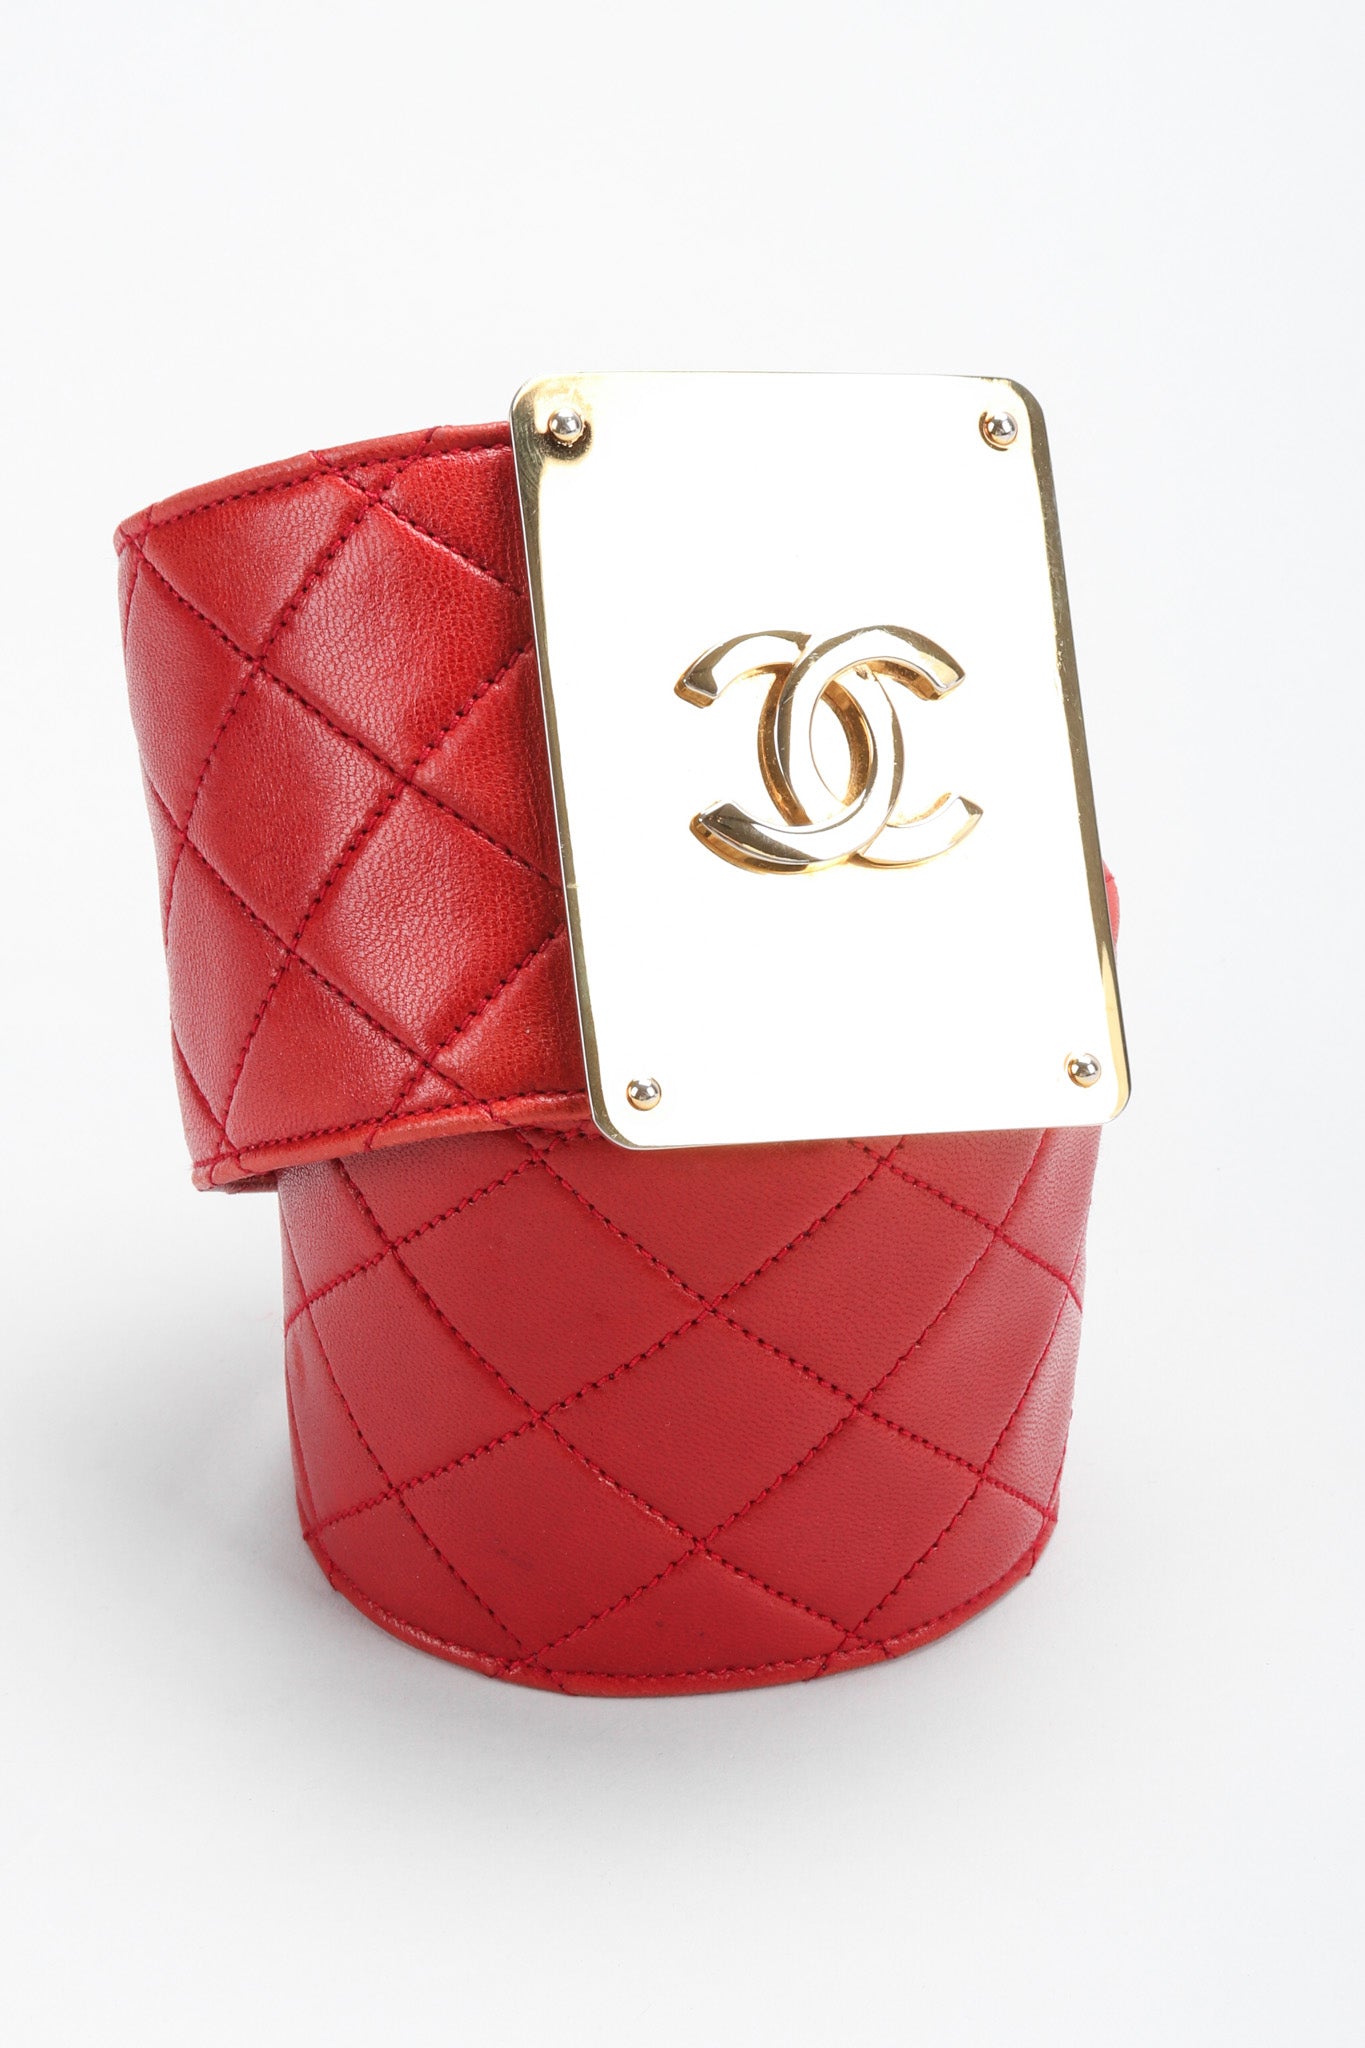 Chanel Gold Quilted Leather Chanel CC Belt Bag Chanel